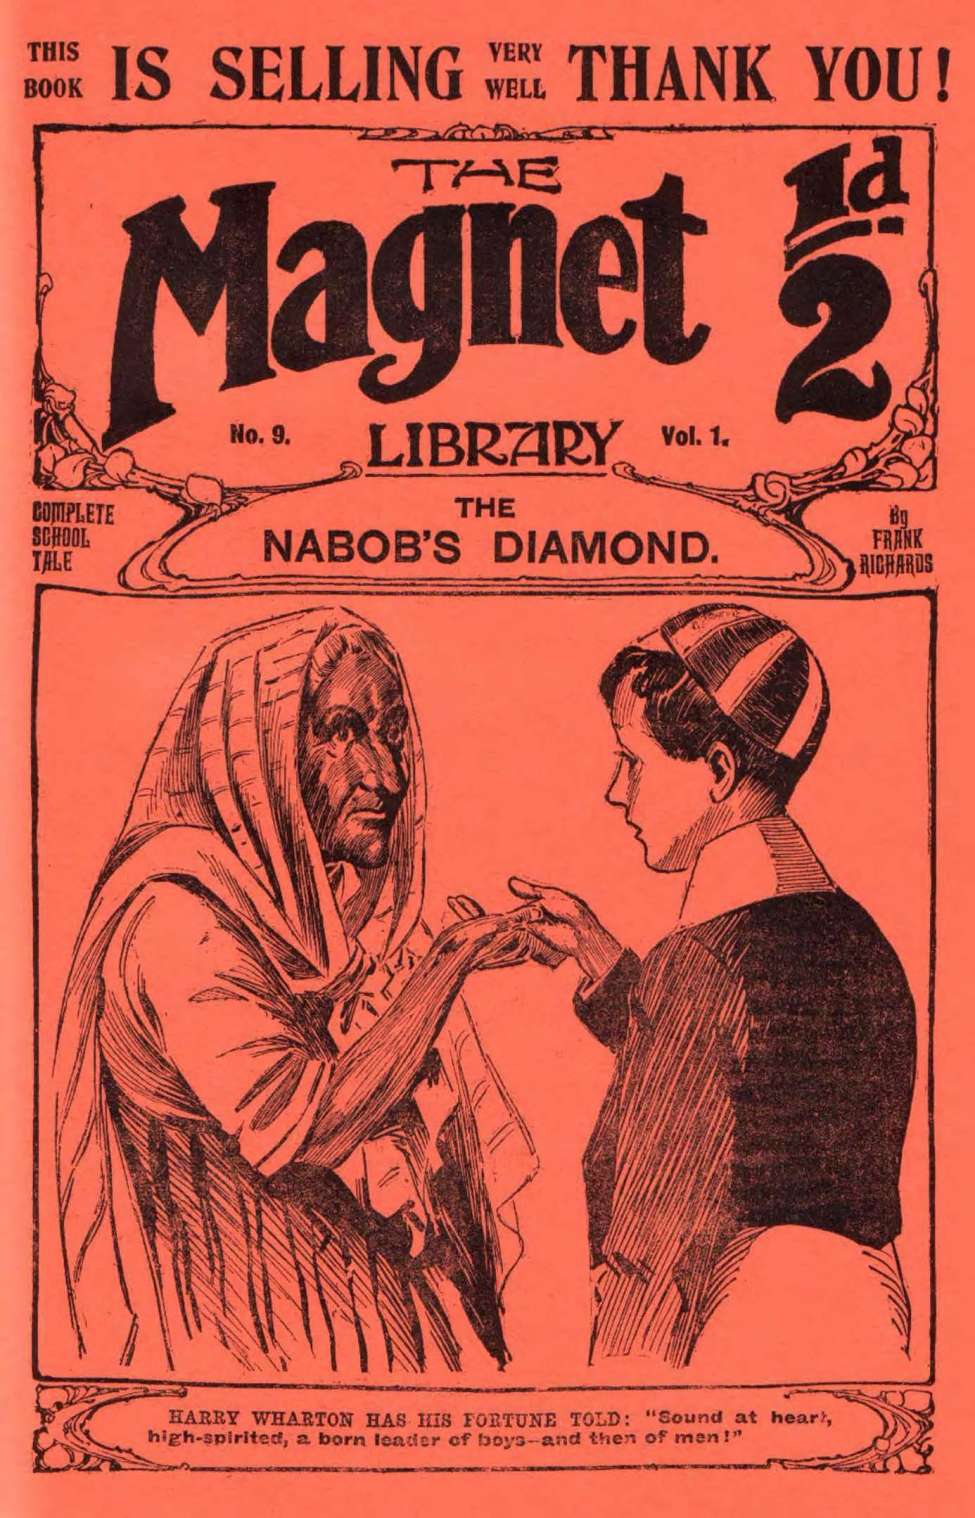 Book Cover For The Magnet 9 - The Nabob's Diamond